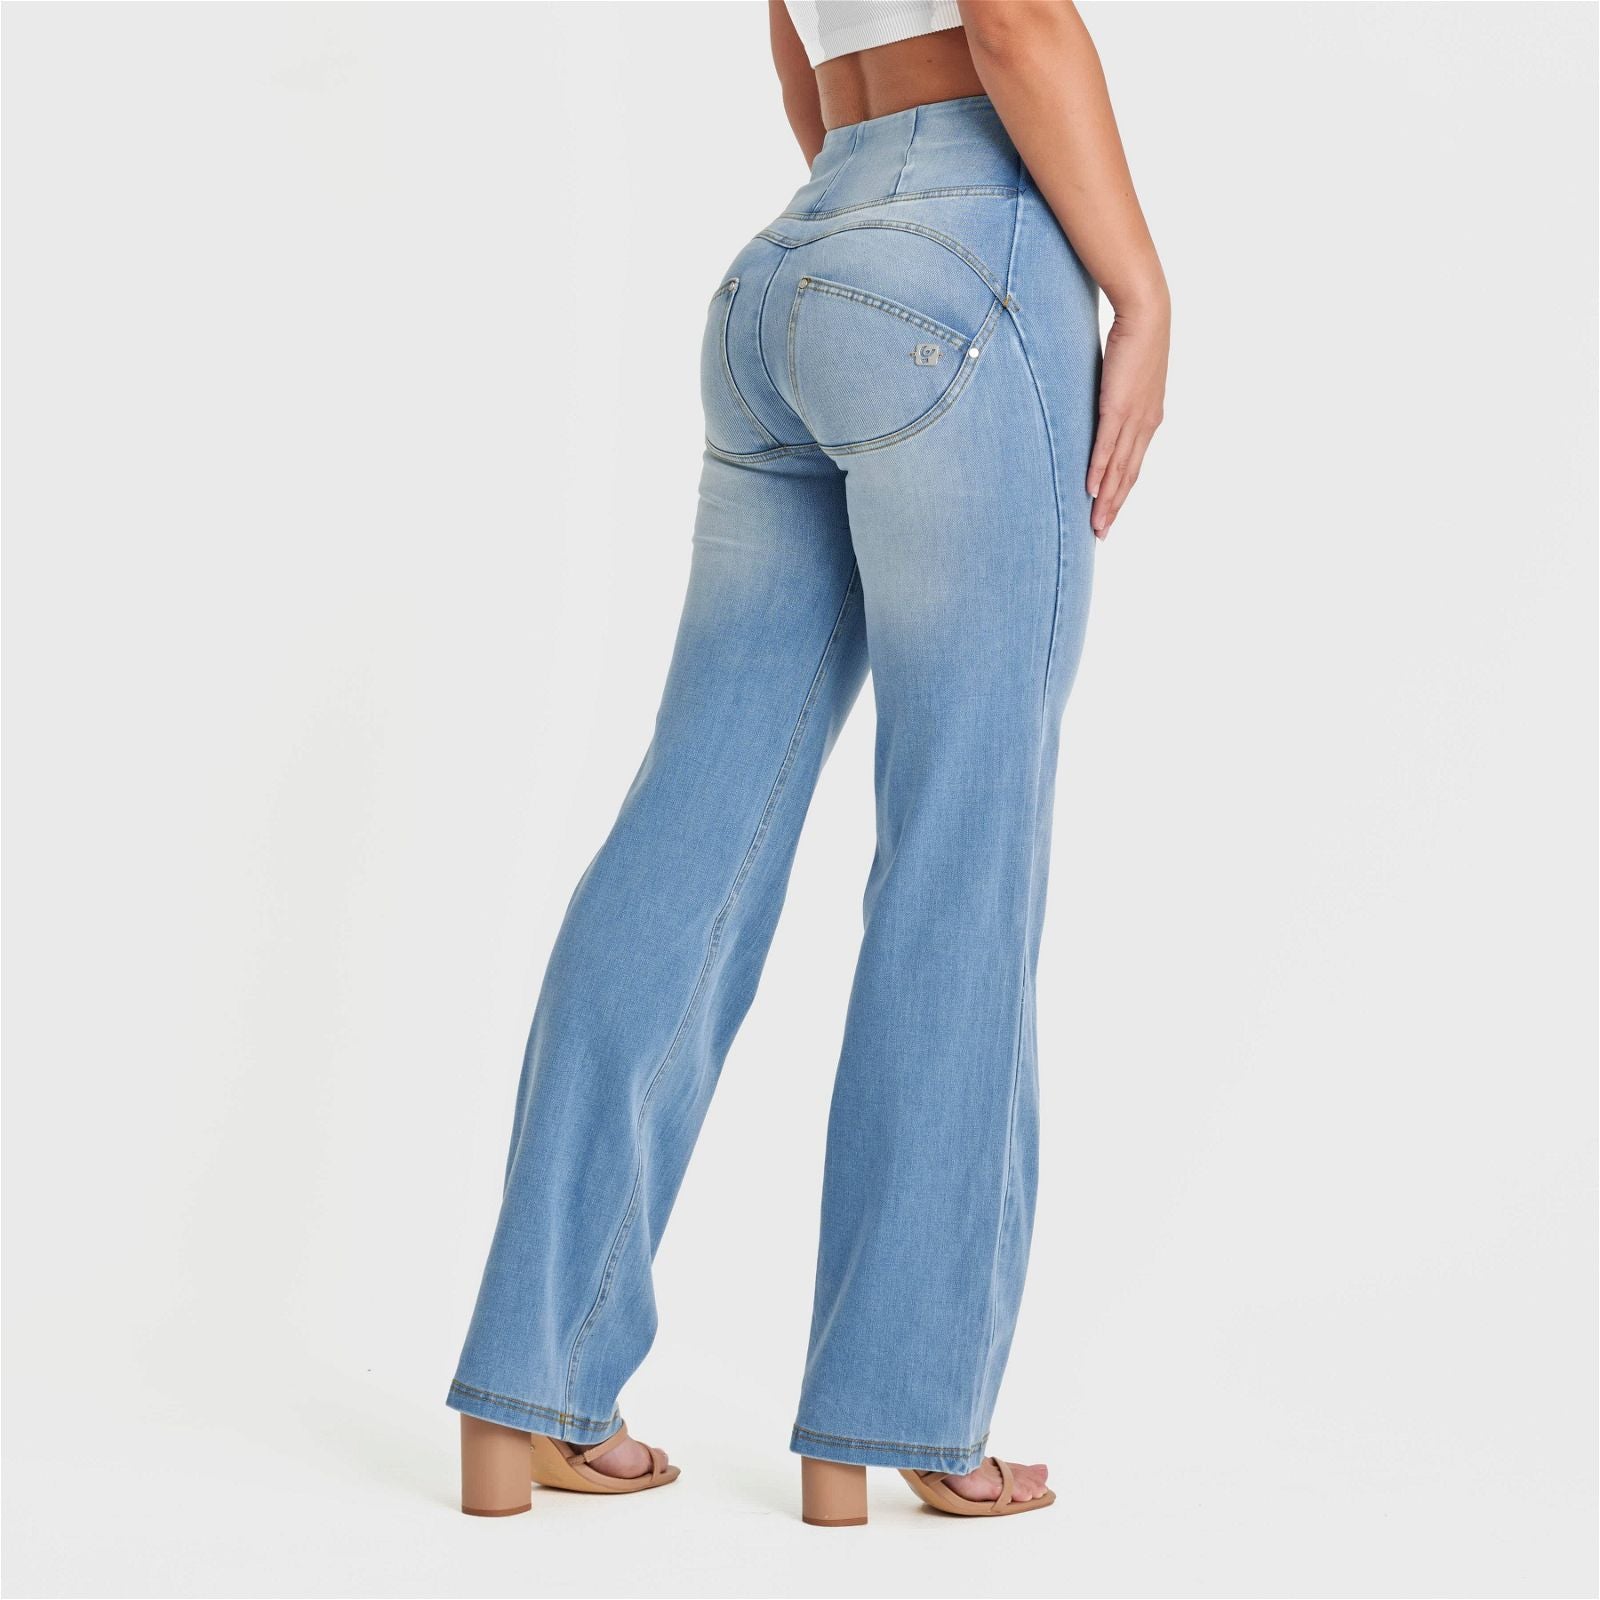 WR.UP® SNUG Jeans - High Waisted - Flare - Light Blue + Yellow Stitching 1